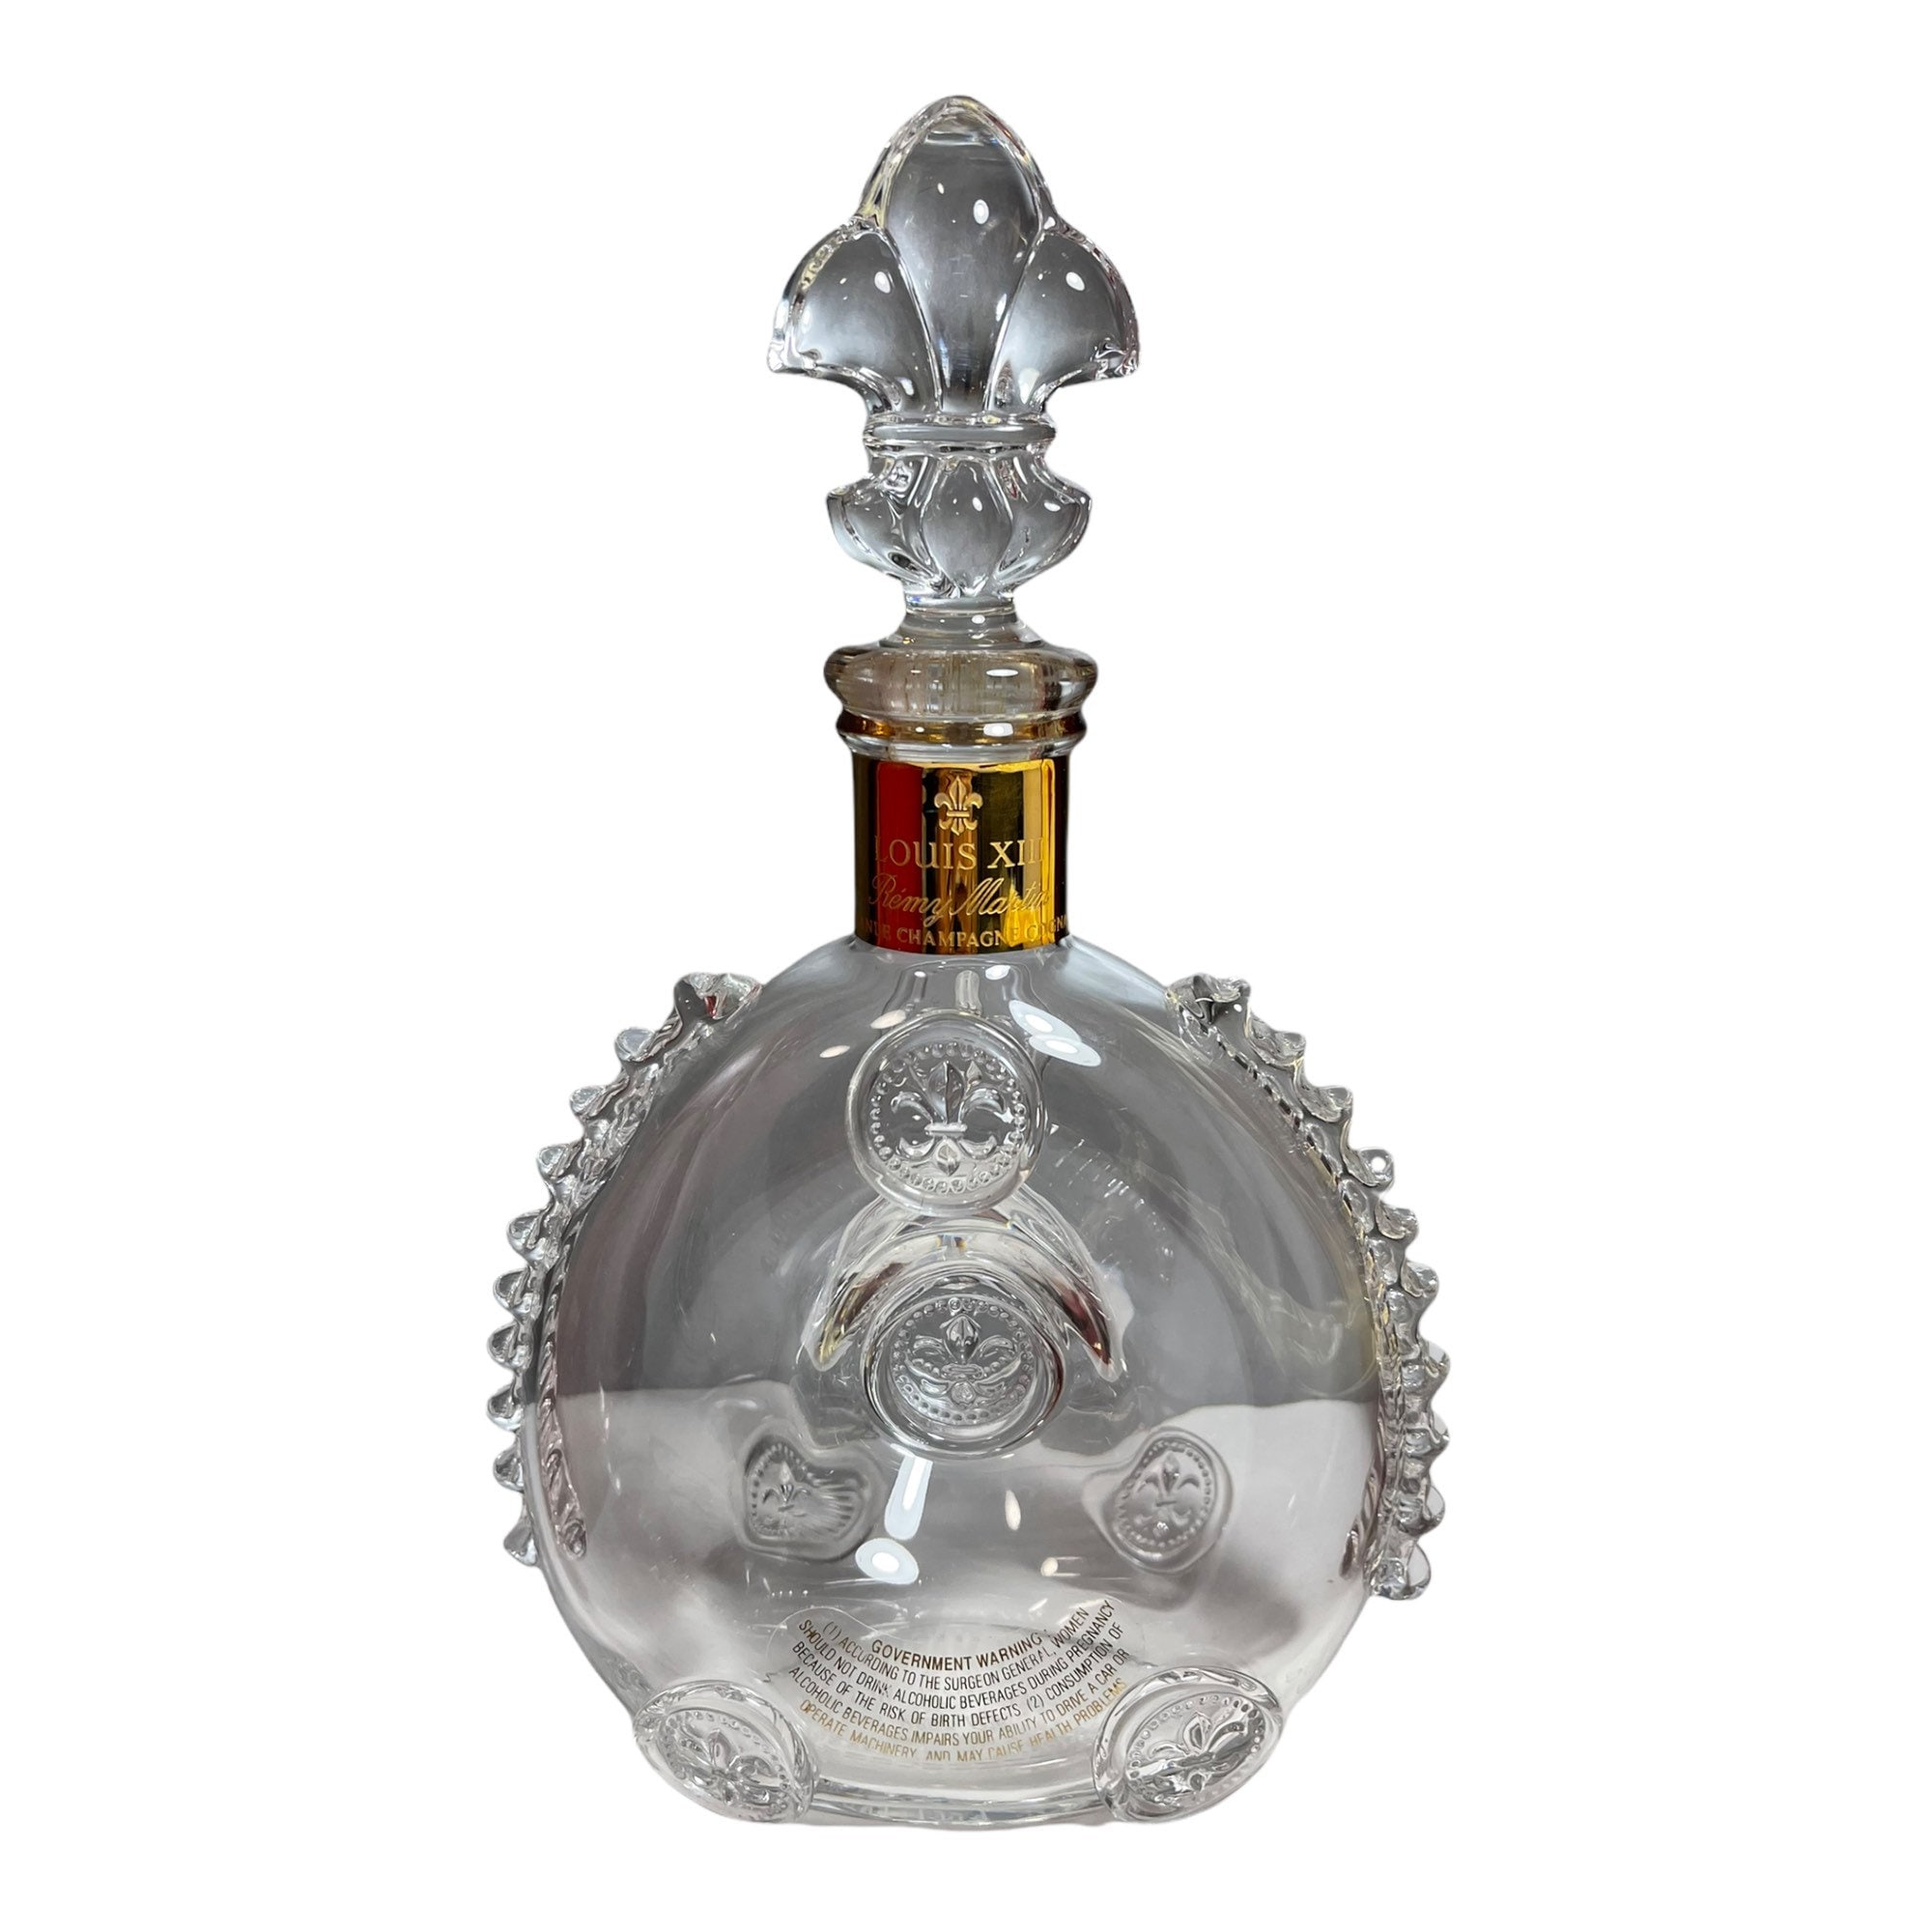 Baccarat on X: For the first time, Les Parfums @LouisVuitton are presented  in a 1-litre bottle made by #Baccarat artisans. An original masterpiece  designed for connoisseurs: the Flacon d'Exception, stamped with the #